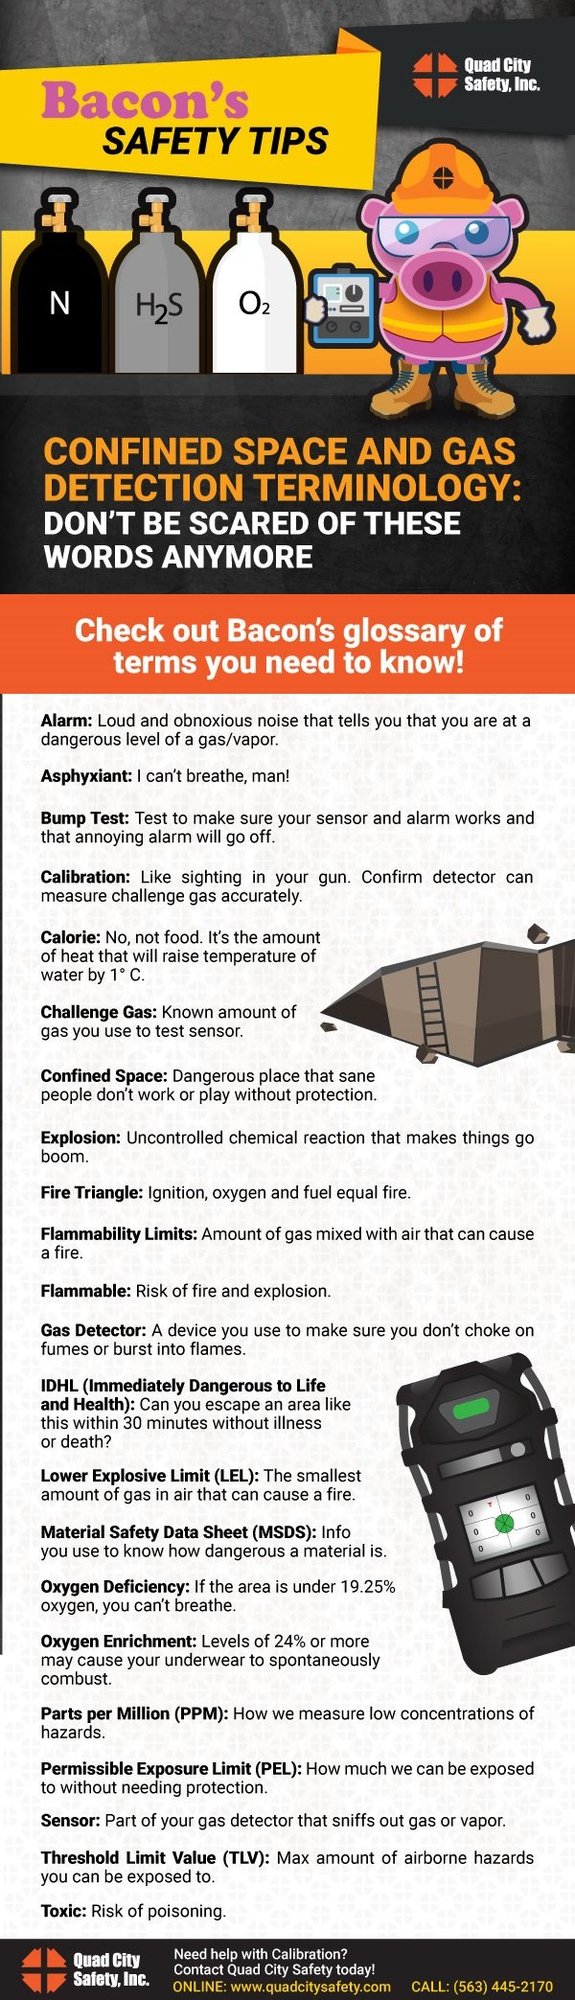 Bacon’s Safety Tips Confined Space and Gas Detection Terminology: Don’t be scared of these words anymore.